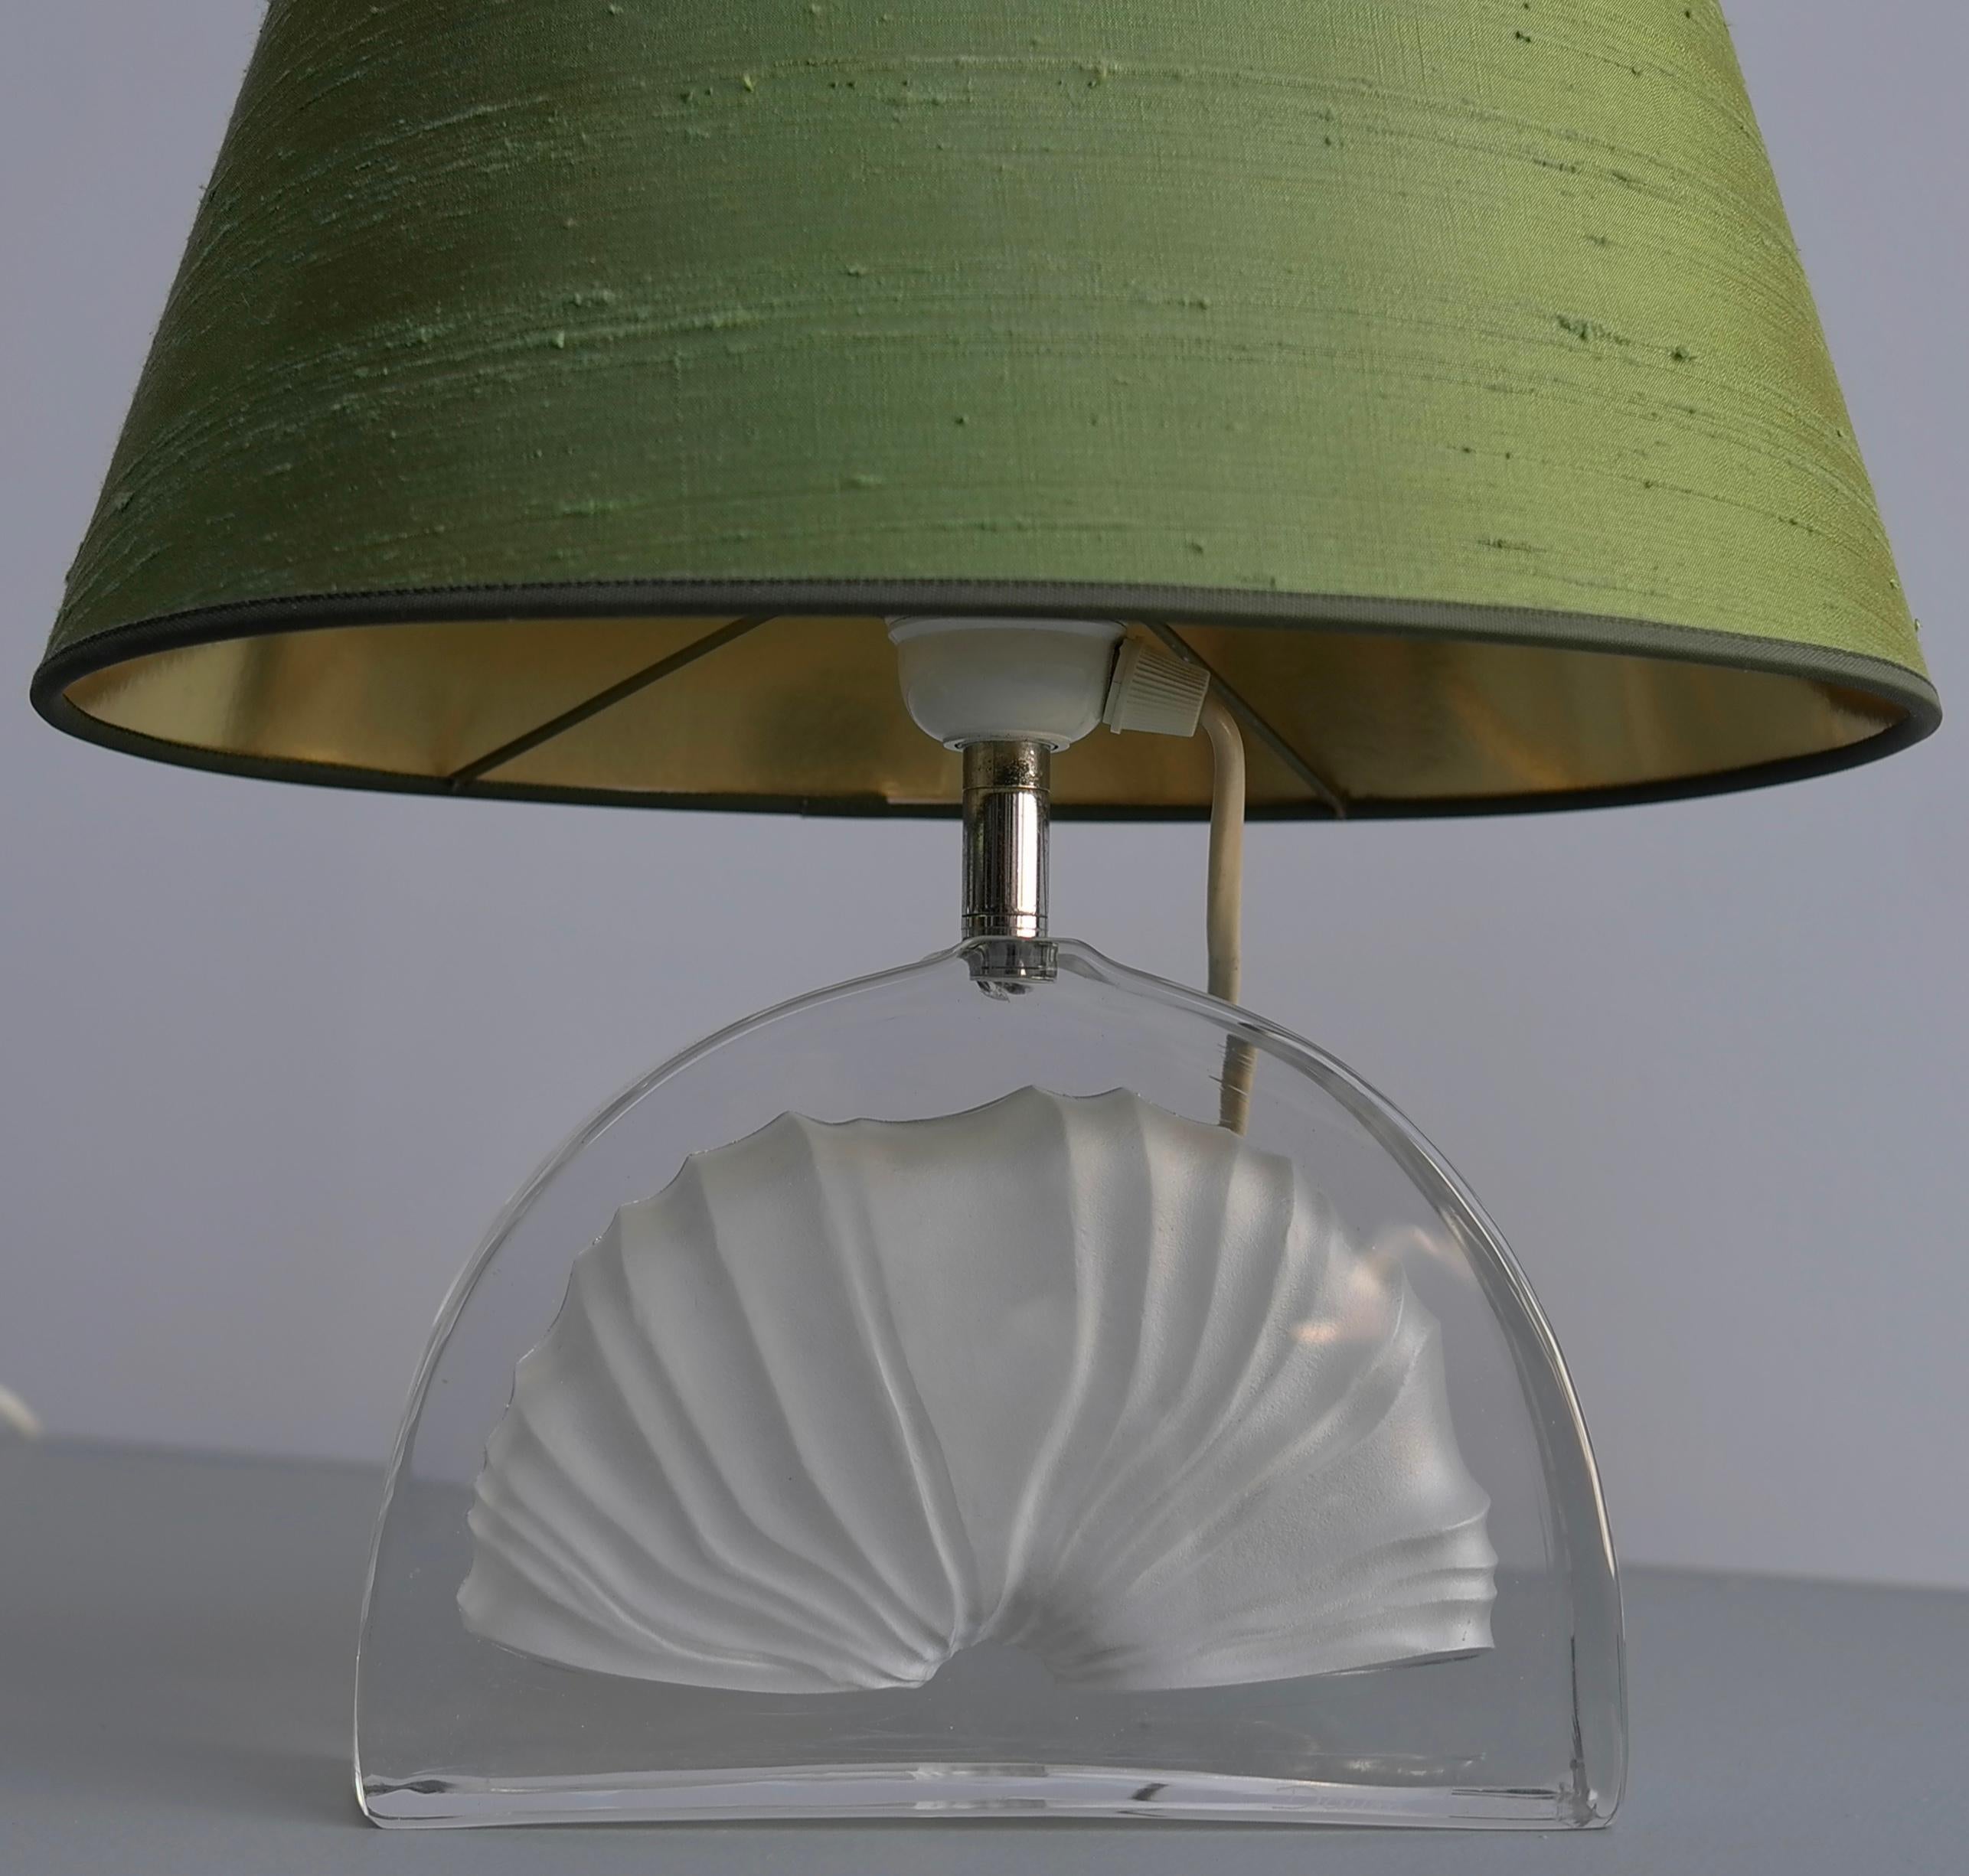 Pair of table lamps by Daum France
Crystal lamp base of semi-circular form, with fossil design. The shades are in fine green Silk.
Both are Signed 'Daum France.

 